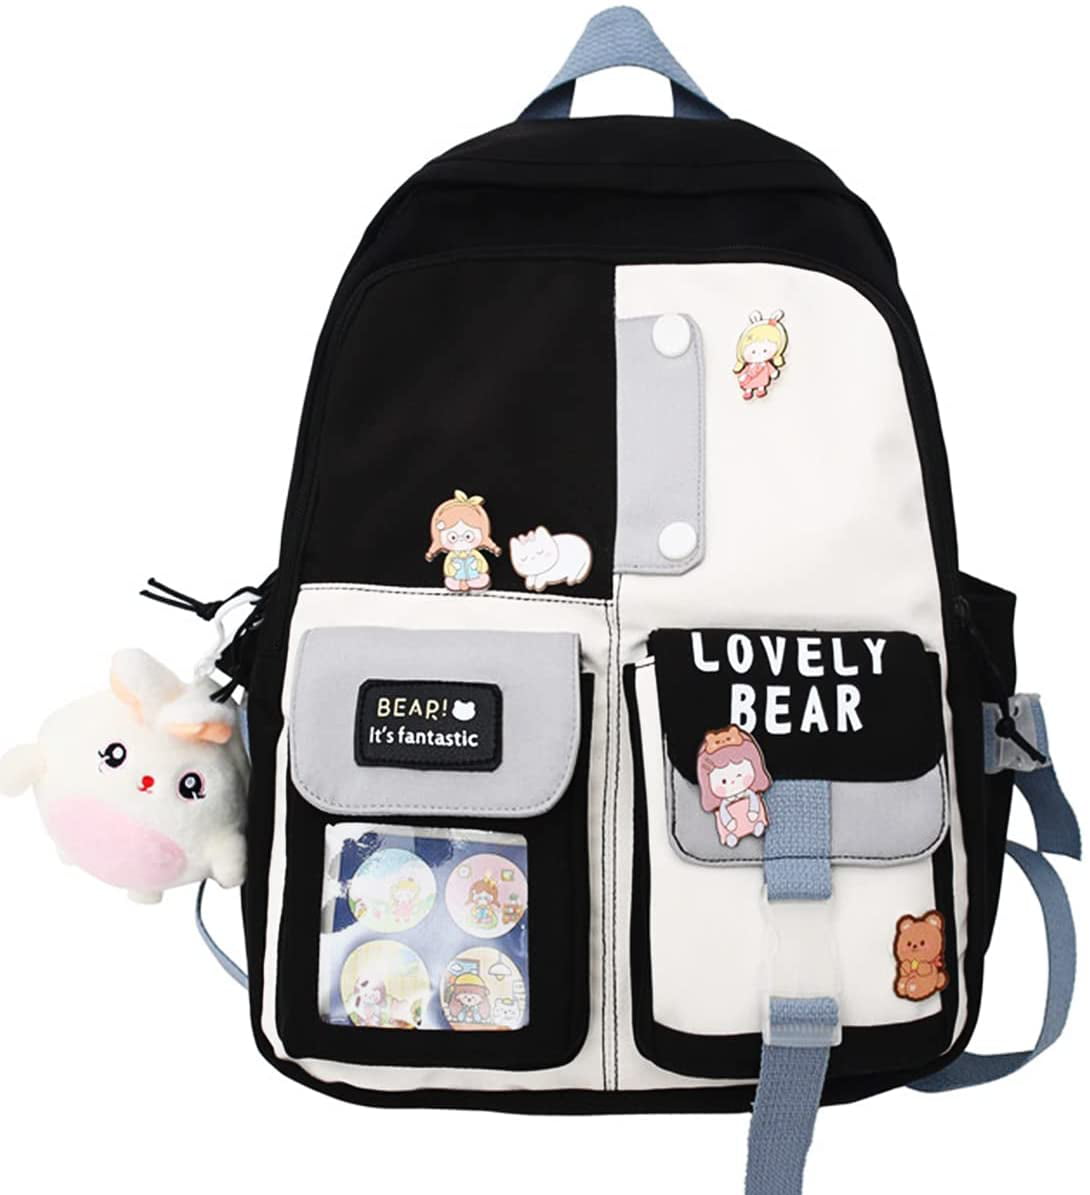 Kawaii Backpack for Girls Women with Pin Bear Accessories Cute College High School Backpack Laptop Bookbags 